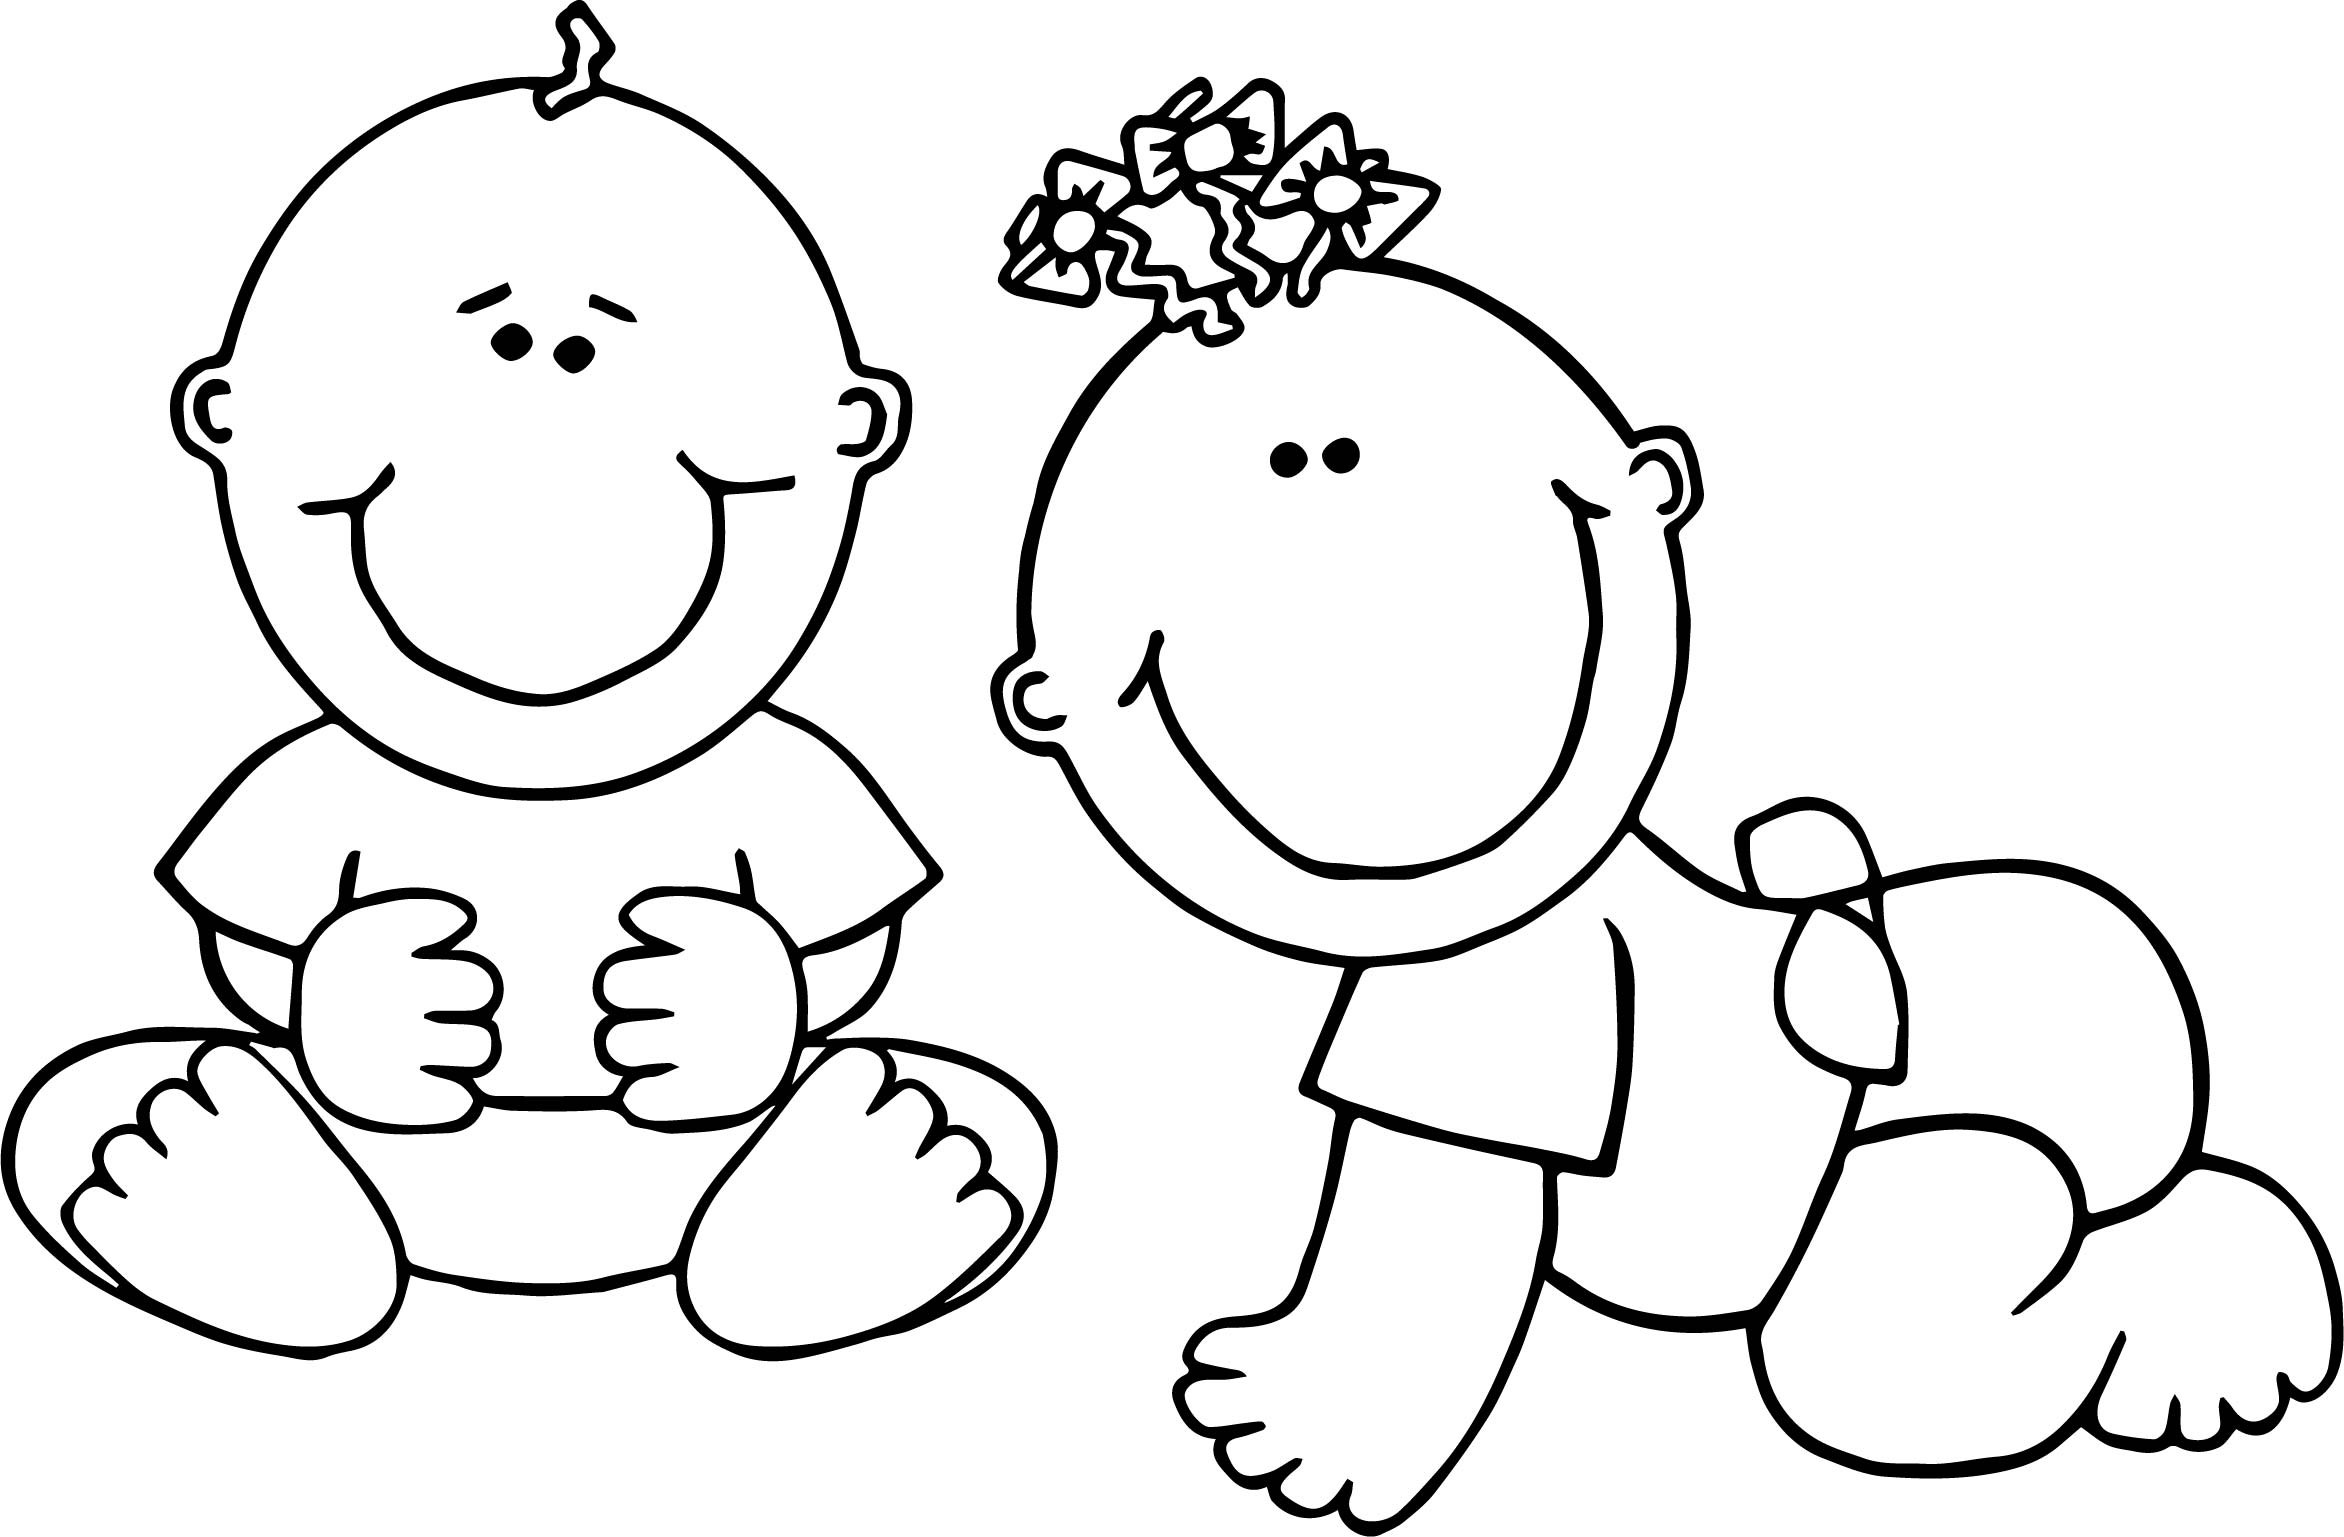 Toddler Boy Coloring Pages
 Two Baby Boy Coloring Page